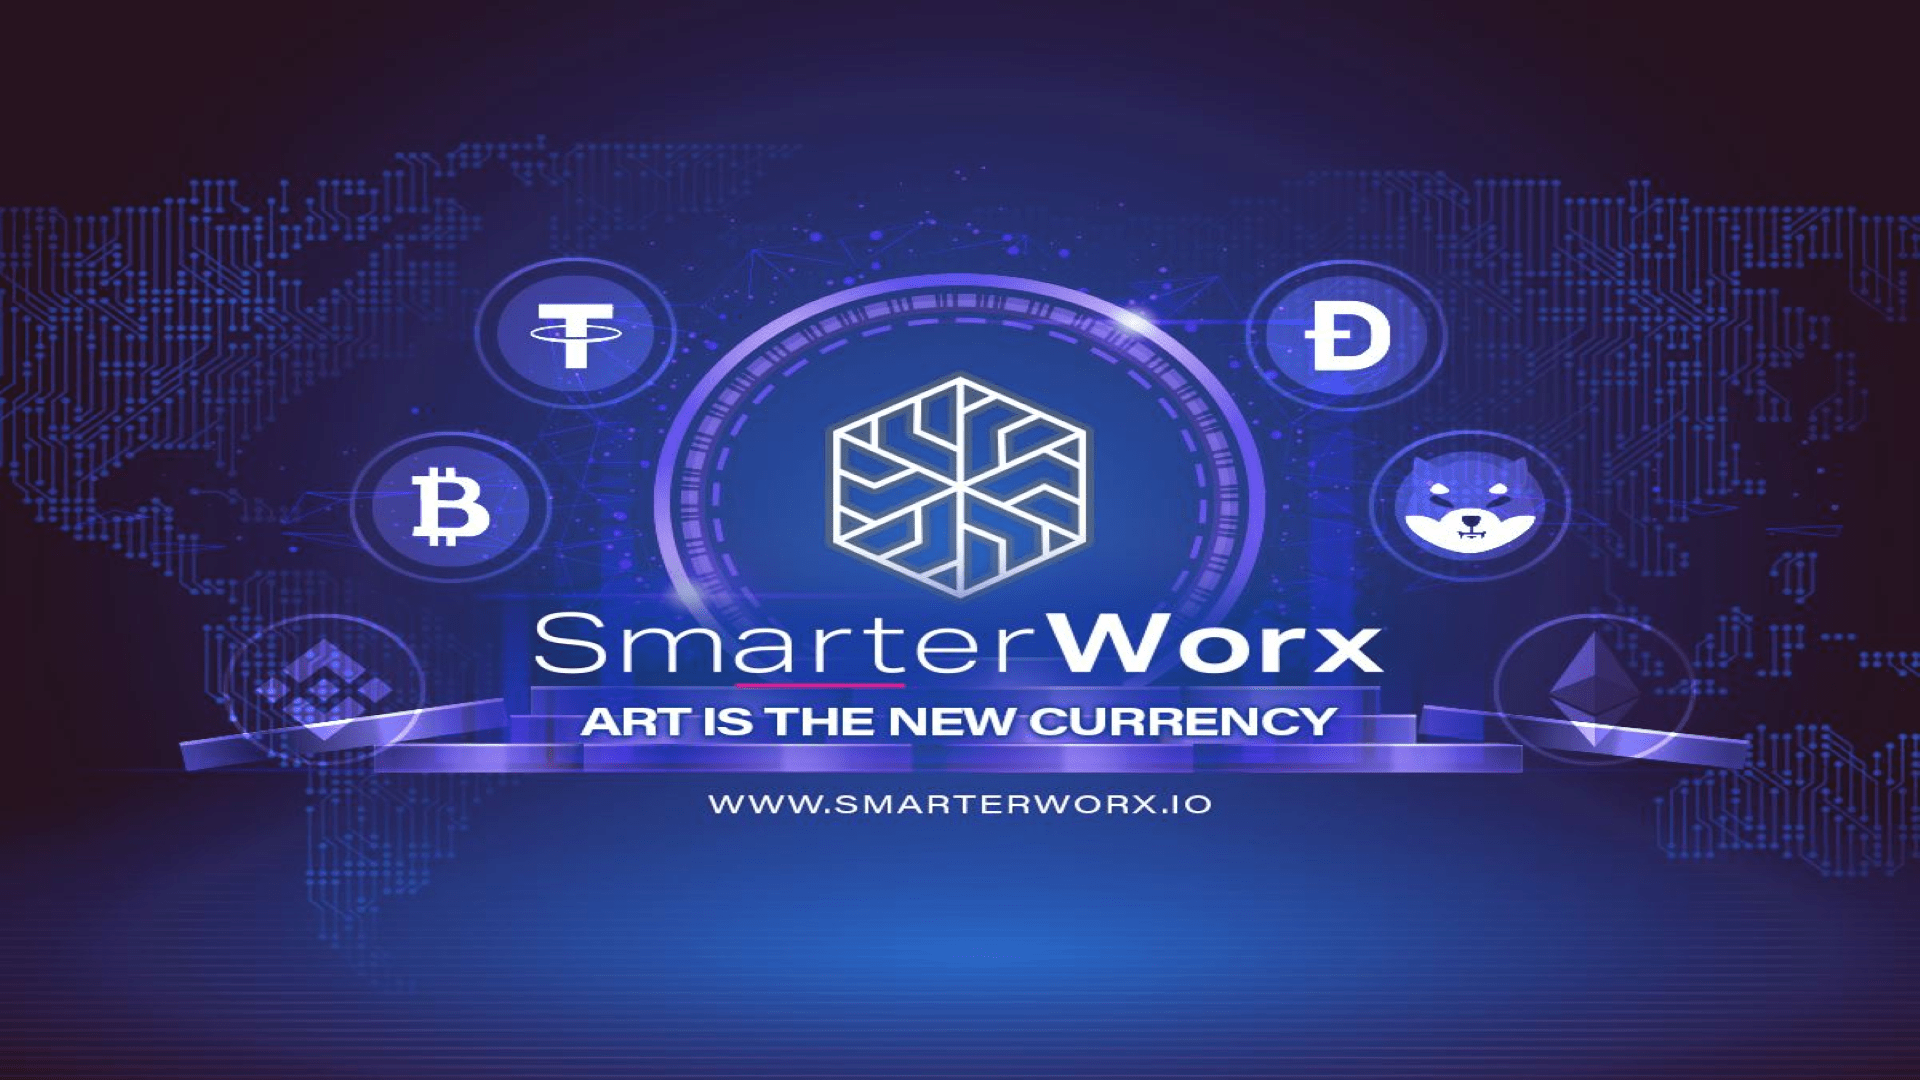 SmarterWorx ICO Makes Waves With Fractionalized NFT Protocol In Fantom and Decentraland Communities